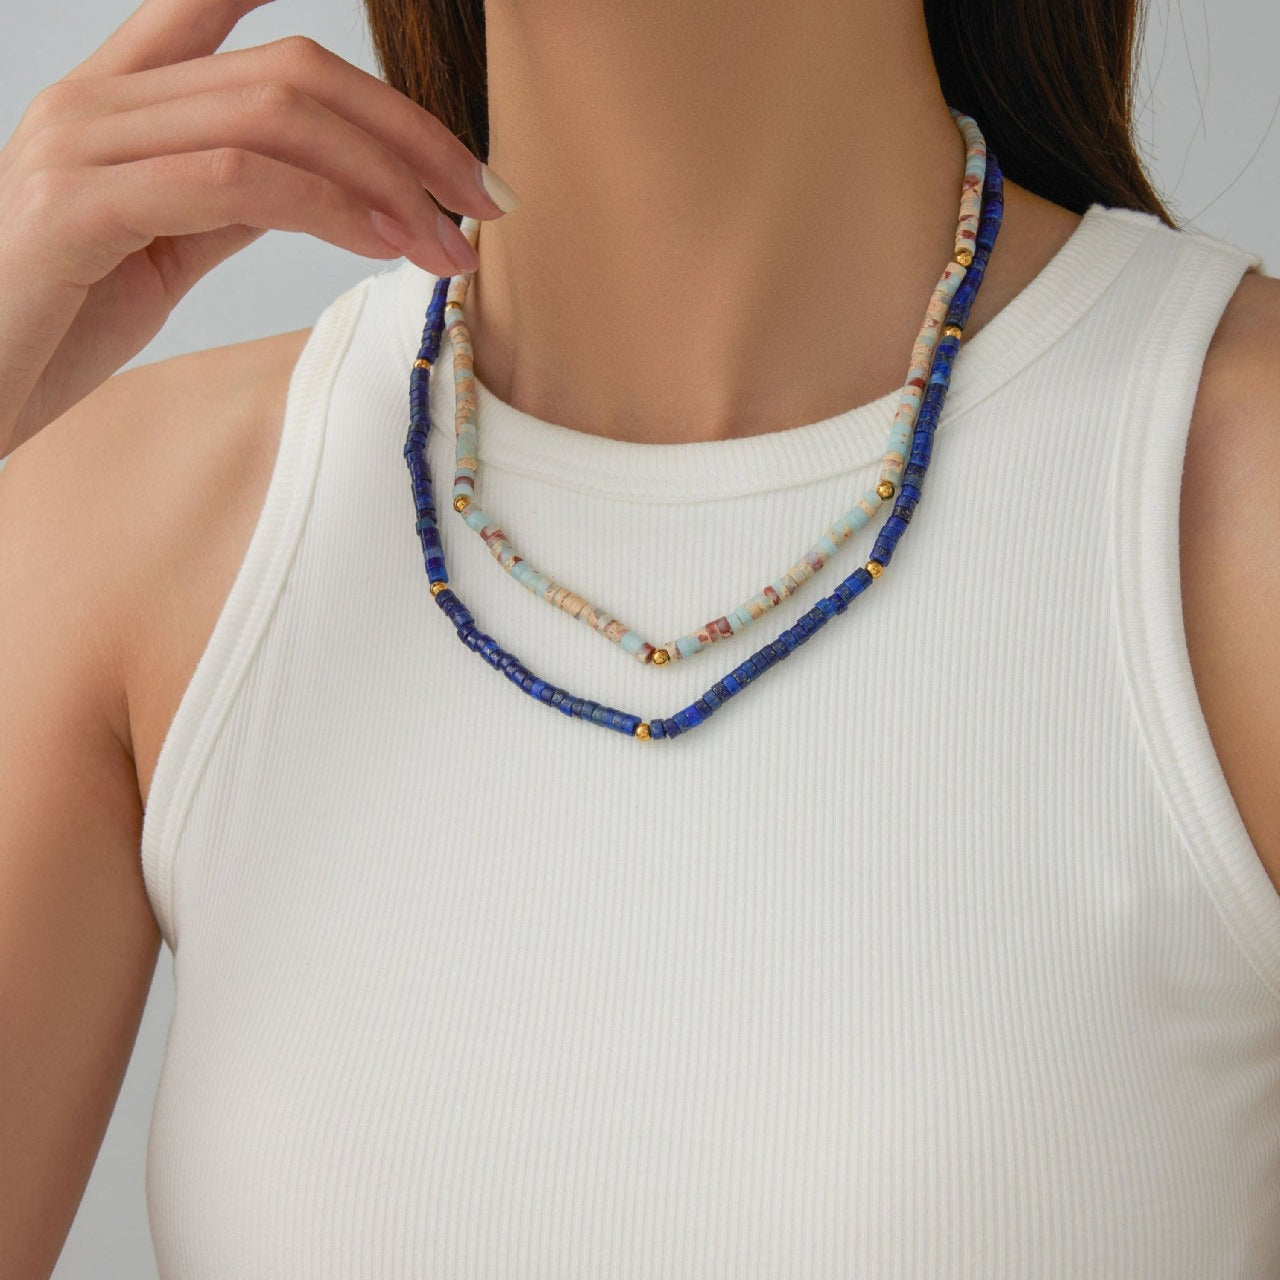 Minimalist Vintage-inspired Natural Stone Beaded Women's Necklace - Unique Design with a Touch of Elegance | UponBasics  UponBasics   